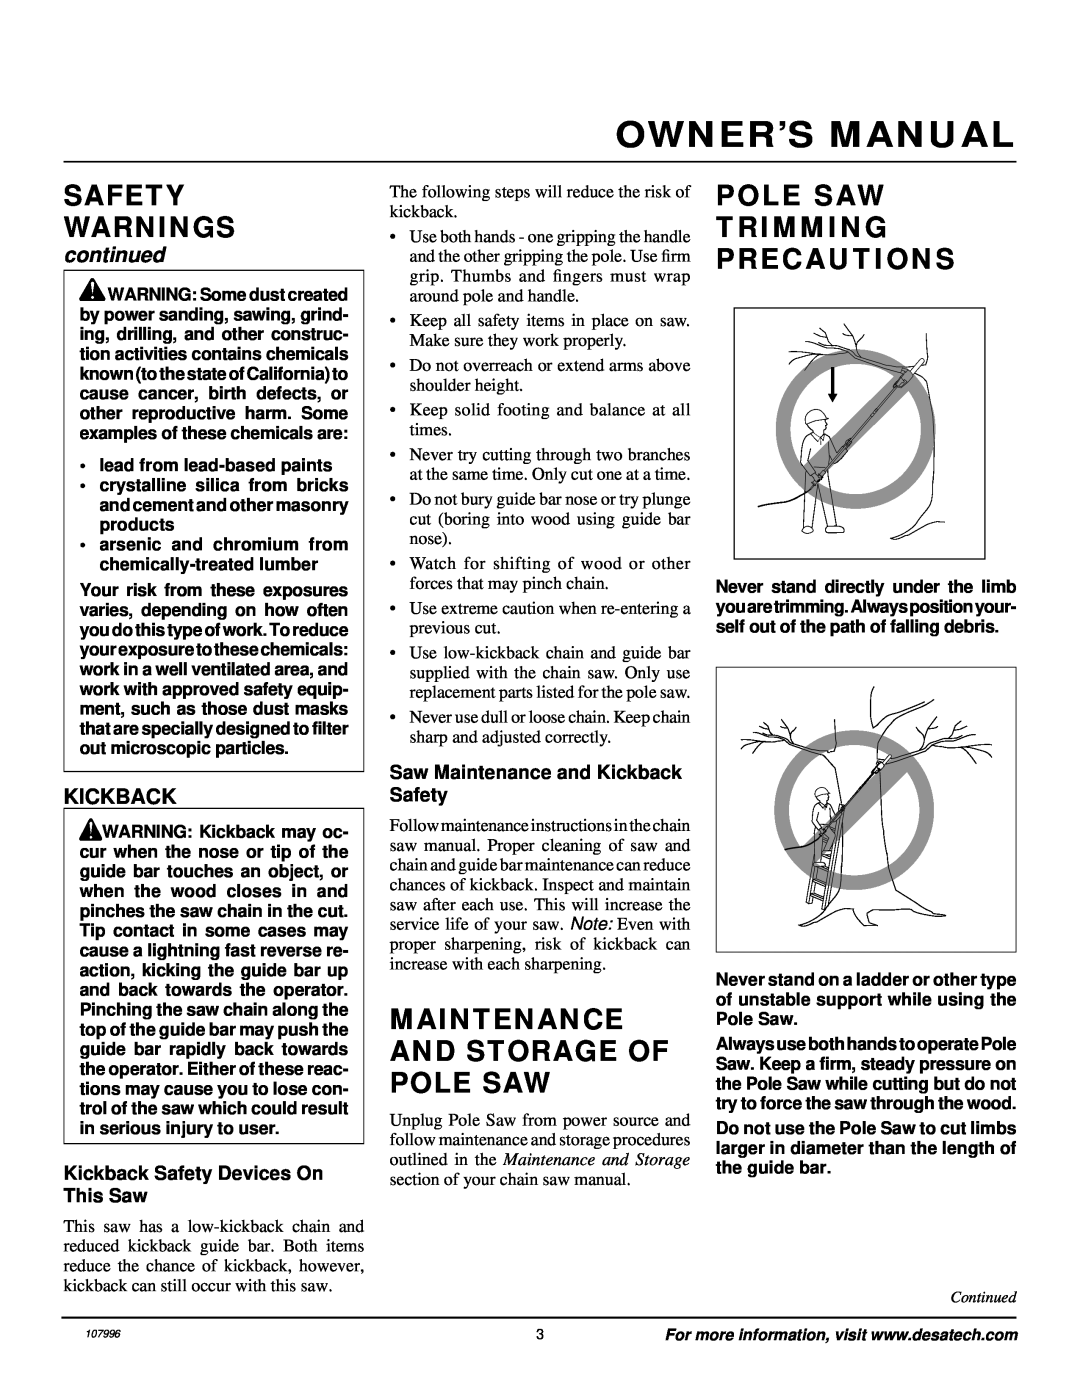 Desa RPS 96 Maintenance And Storage Of Pole Saw, Pole Saw Trimming Precautions, continued, Kickback, Safety Warnings 